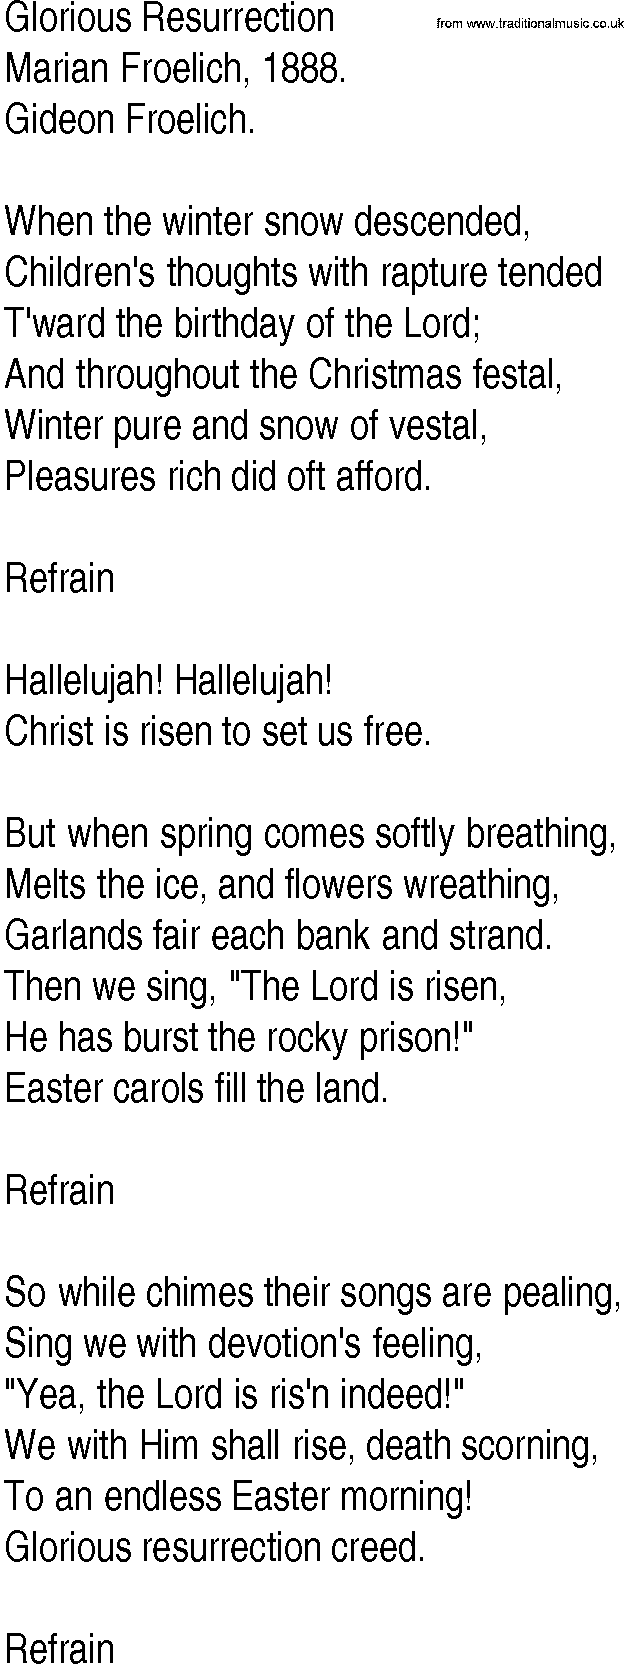 Hymn and Gospel Song: Glorious Resurrection by Marian Froelich lyrics